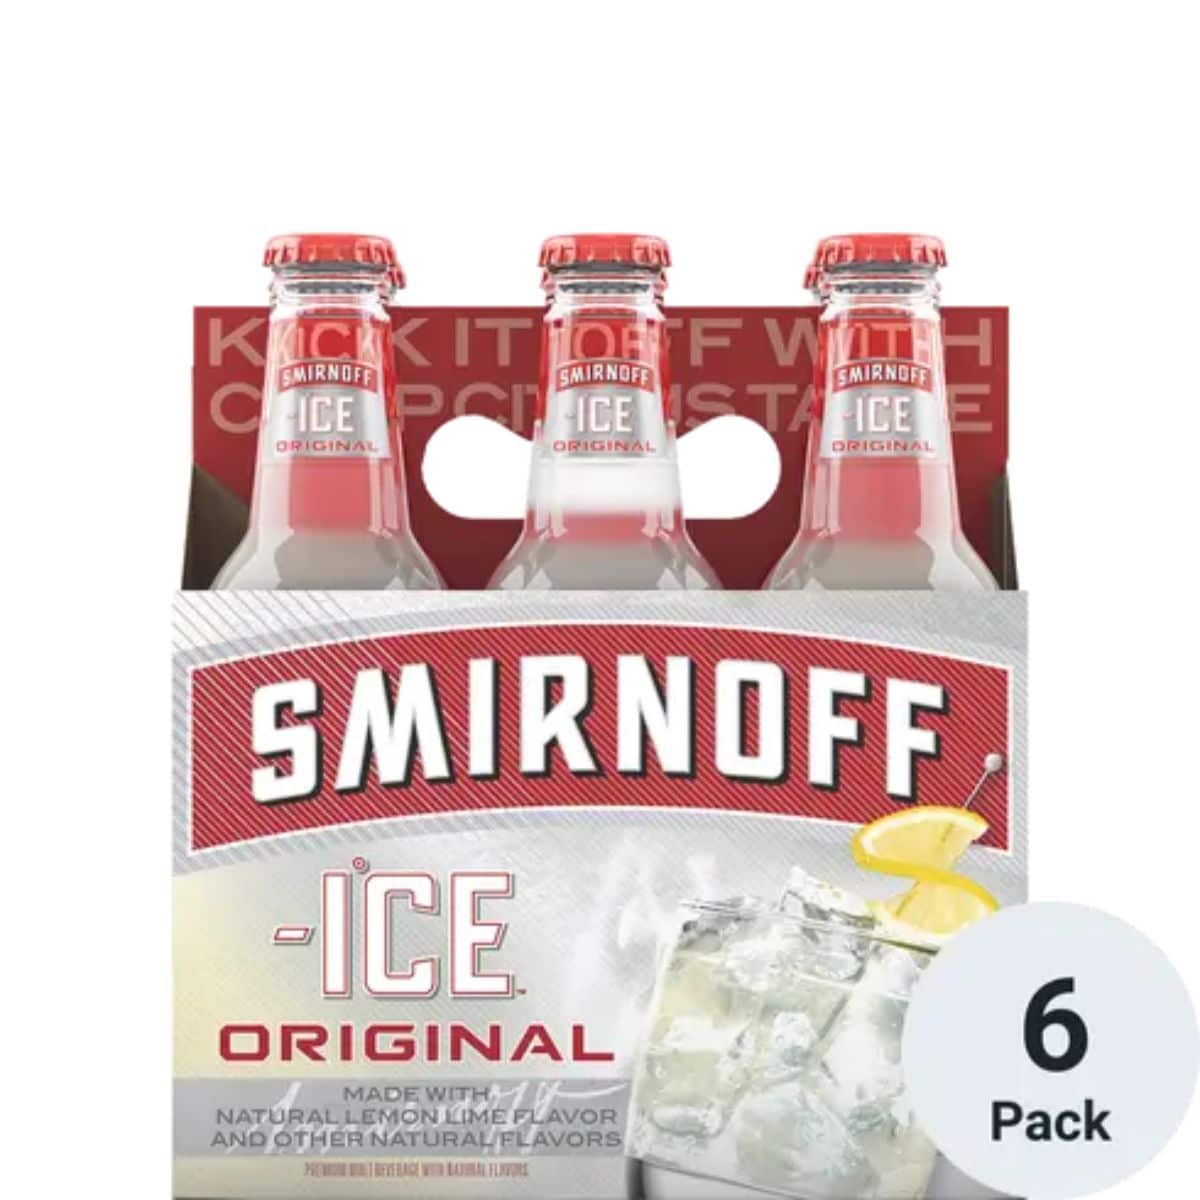 A photo of a six pack of Smirnoff Ice.